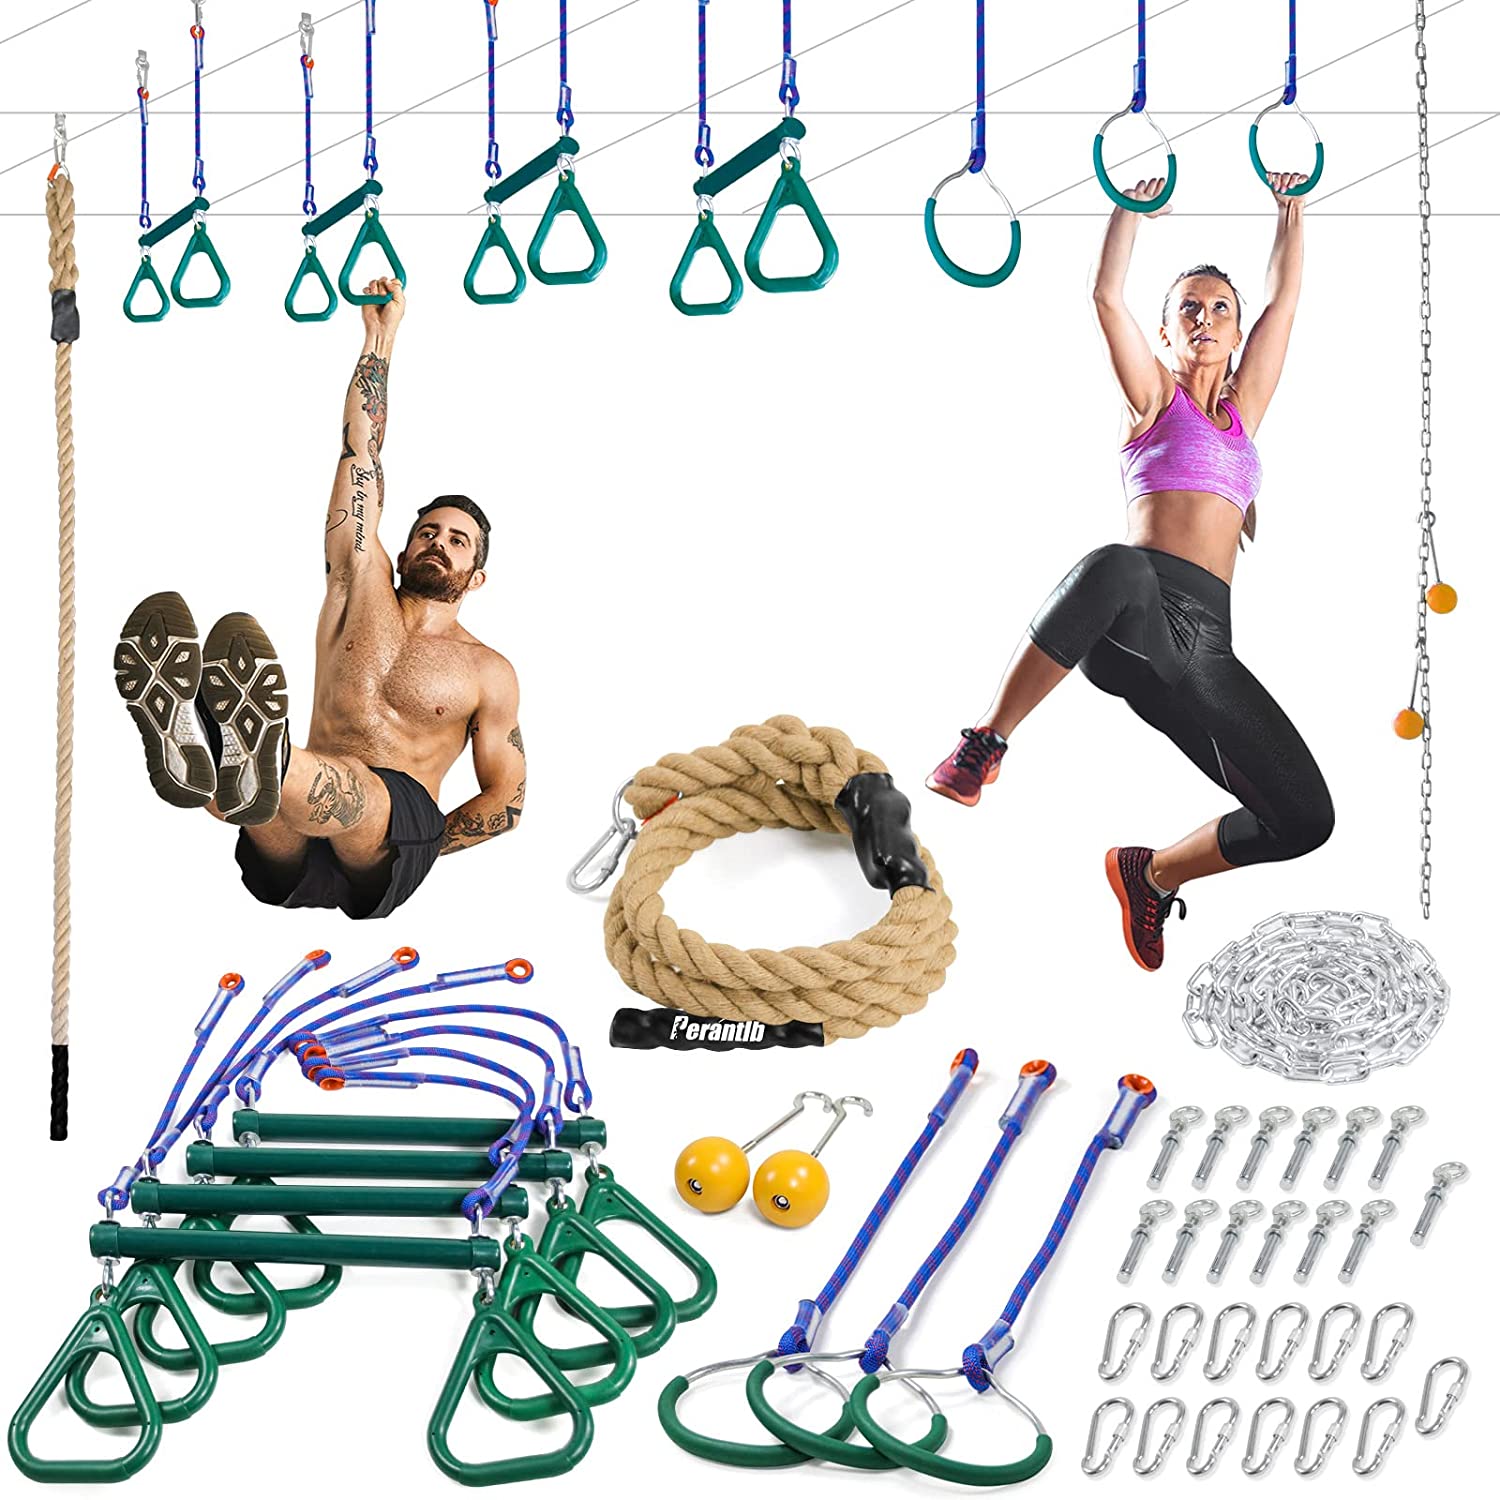 Perantlb Indoor Ninja Warrior Obstacle Course for Adults,Roof Strength Training Set, Including Climbing Rope, Rings, Gymnastics Rings, Trapeze Swing Bar Rings